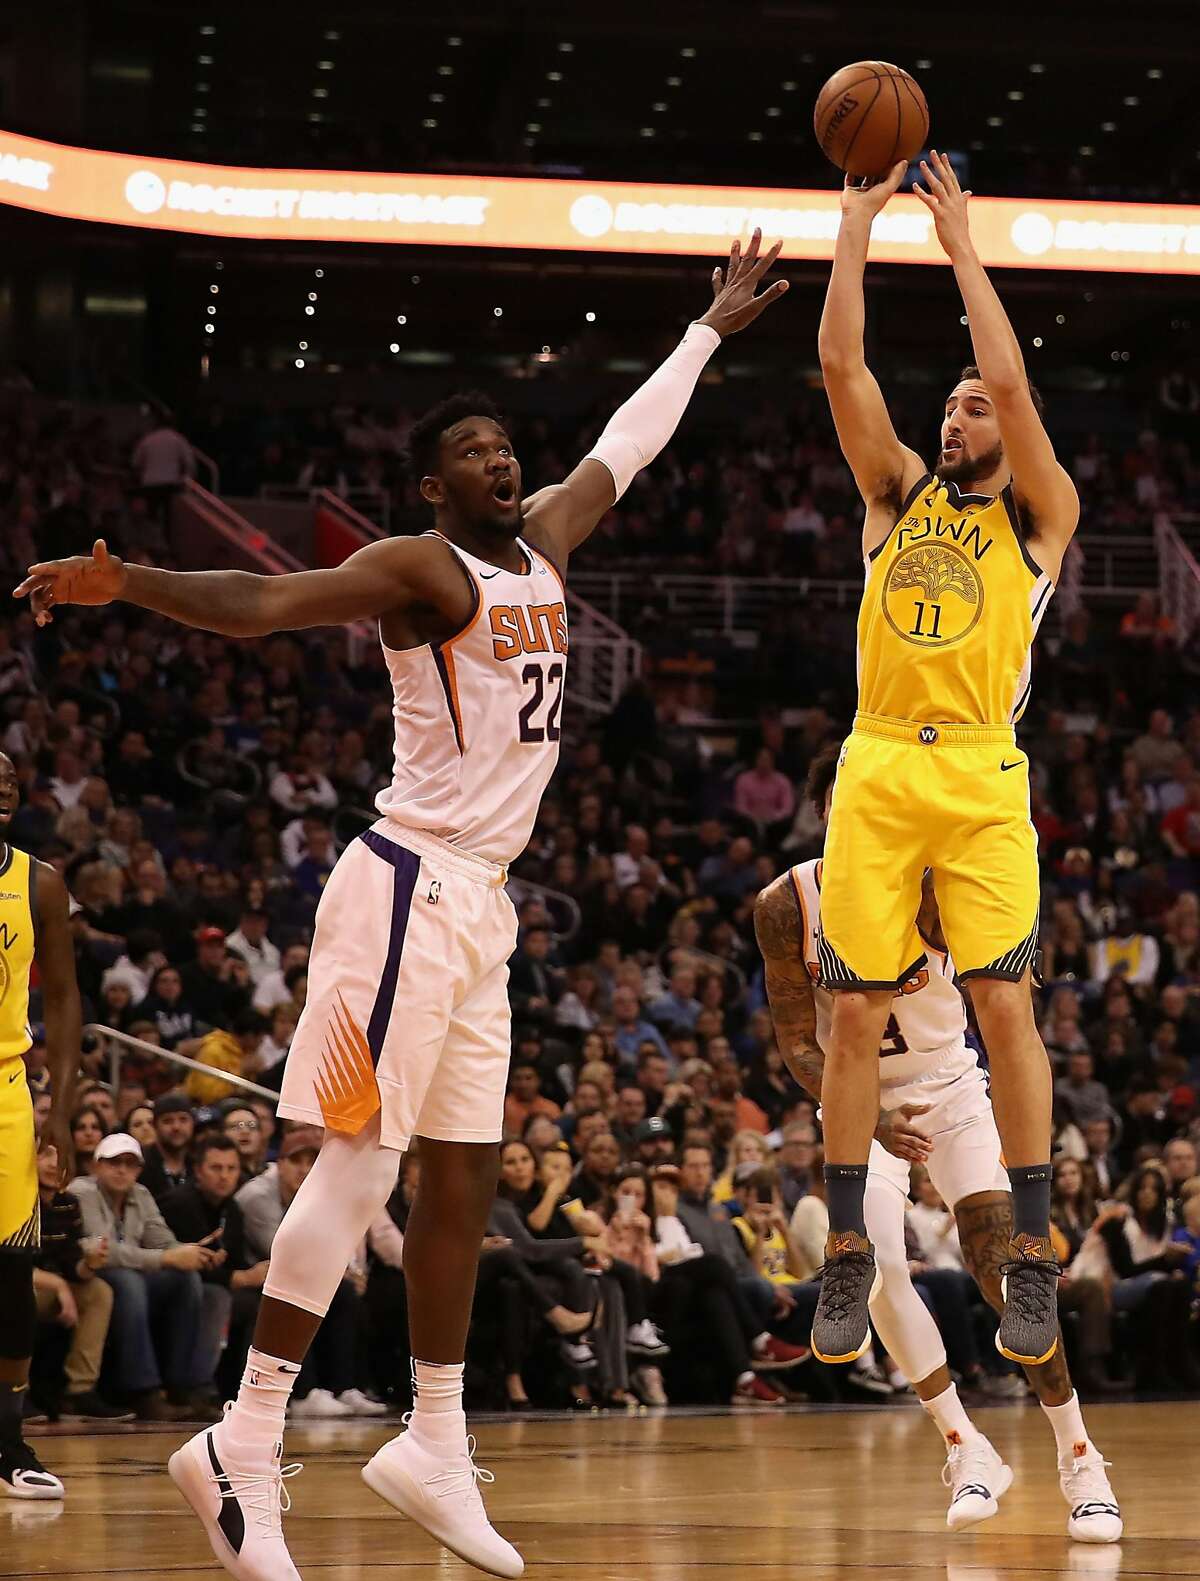 PHOENIX, ARIZONA - DECEMBER 31: Klay Thompson #11 of the Golden State Warriors puts up a shot over Deandre Ayton #22 of the Phoenix Suns during the first half of the NBA game at Talking Stick Resort Arena on December 31, 2018 in Phoenix, Arizona. The Warriors defeated the Suns 132-109. (Photo by Christian Petersen/Getty Images)